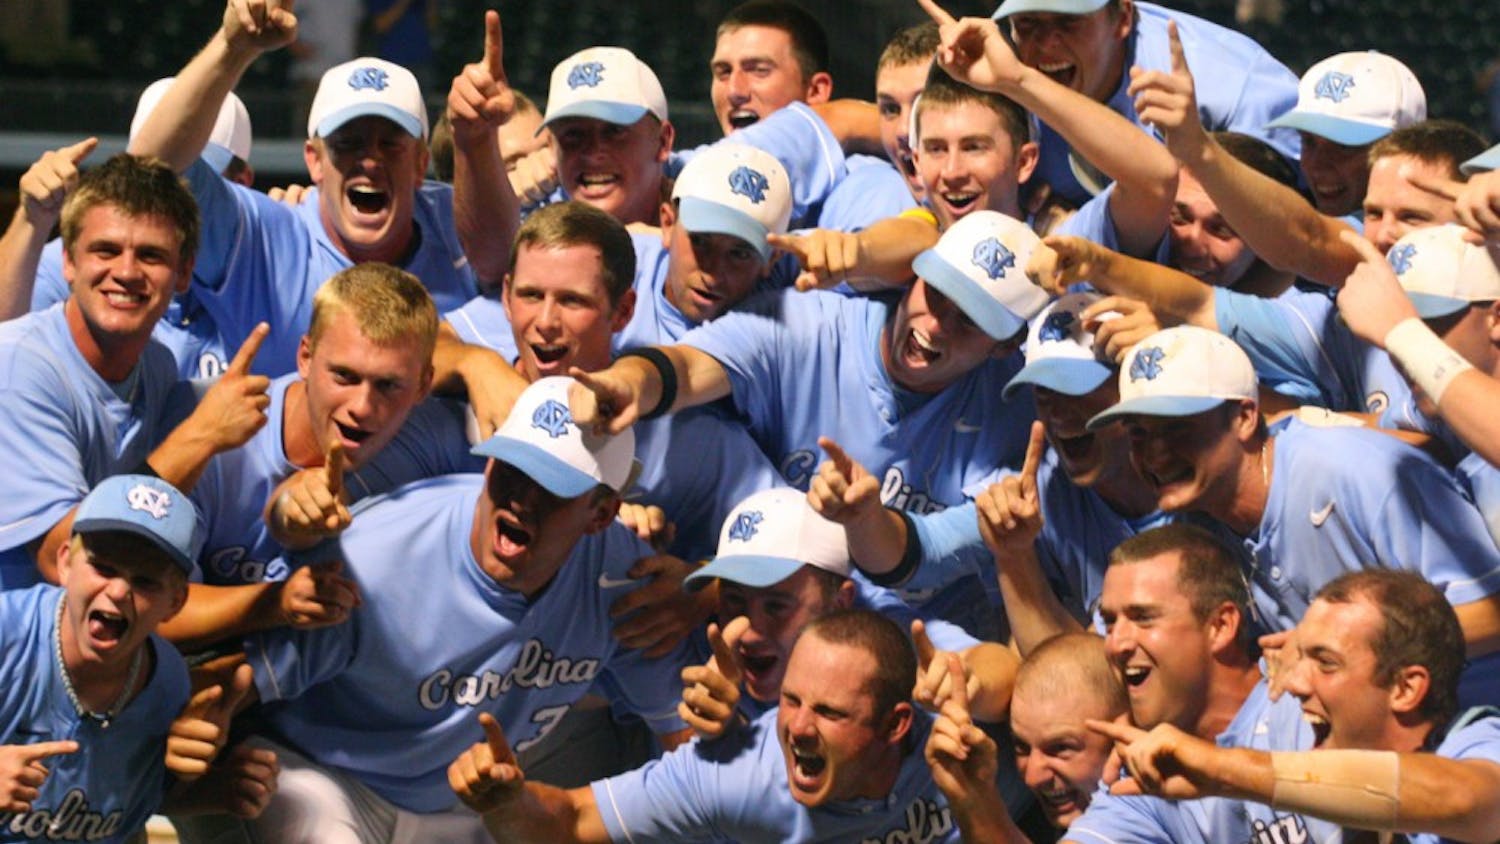 Photo: Tar Heels head to Omaha for fifth College World Series in six years (Lizzie Cox)